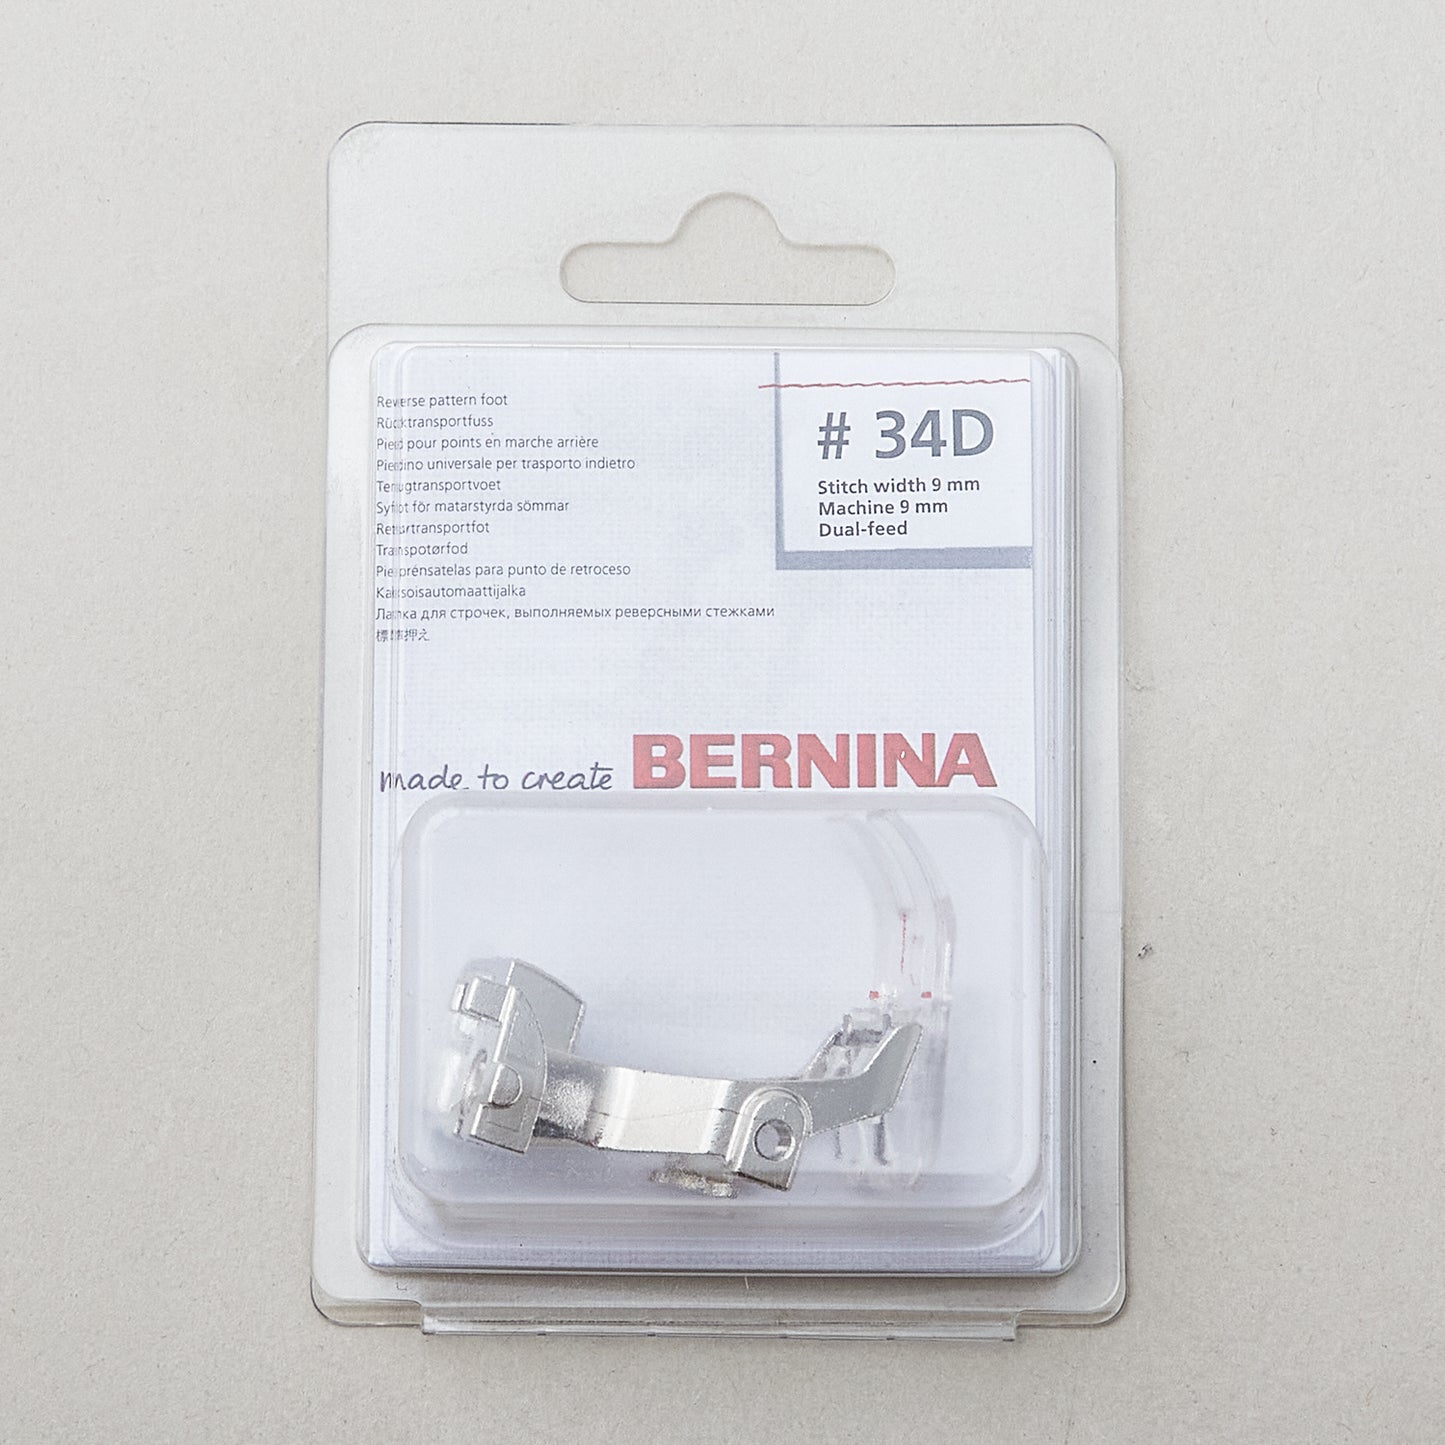 Bernina Reverse Pattern Foot with Clear Sole #34D Alternative View #1